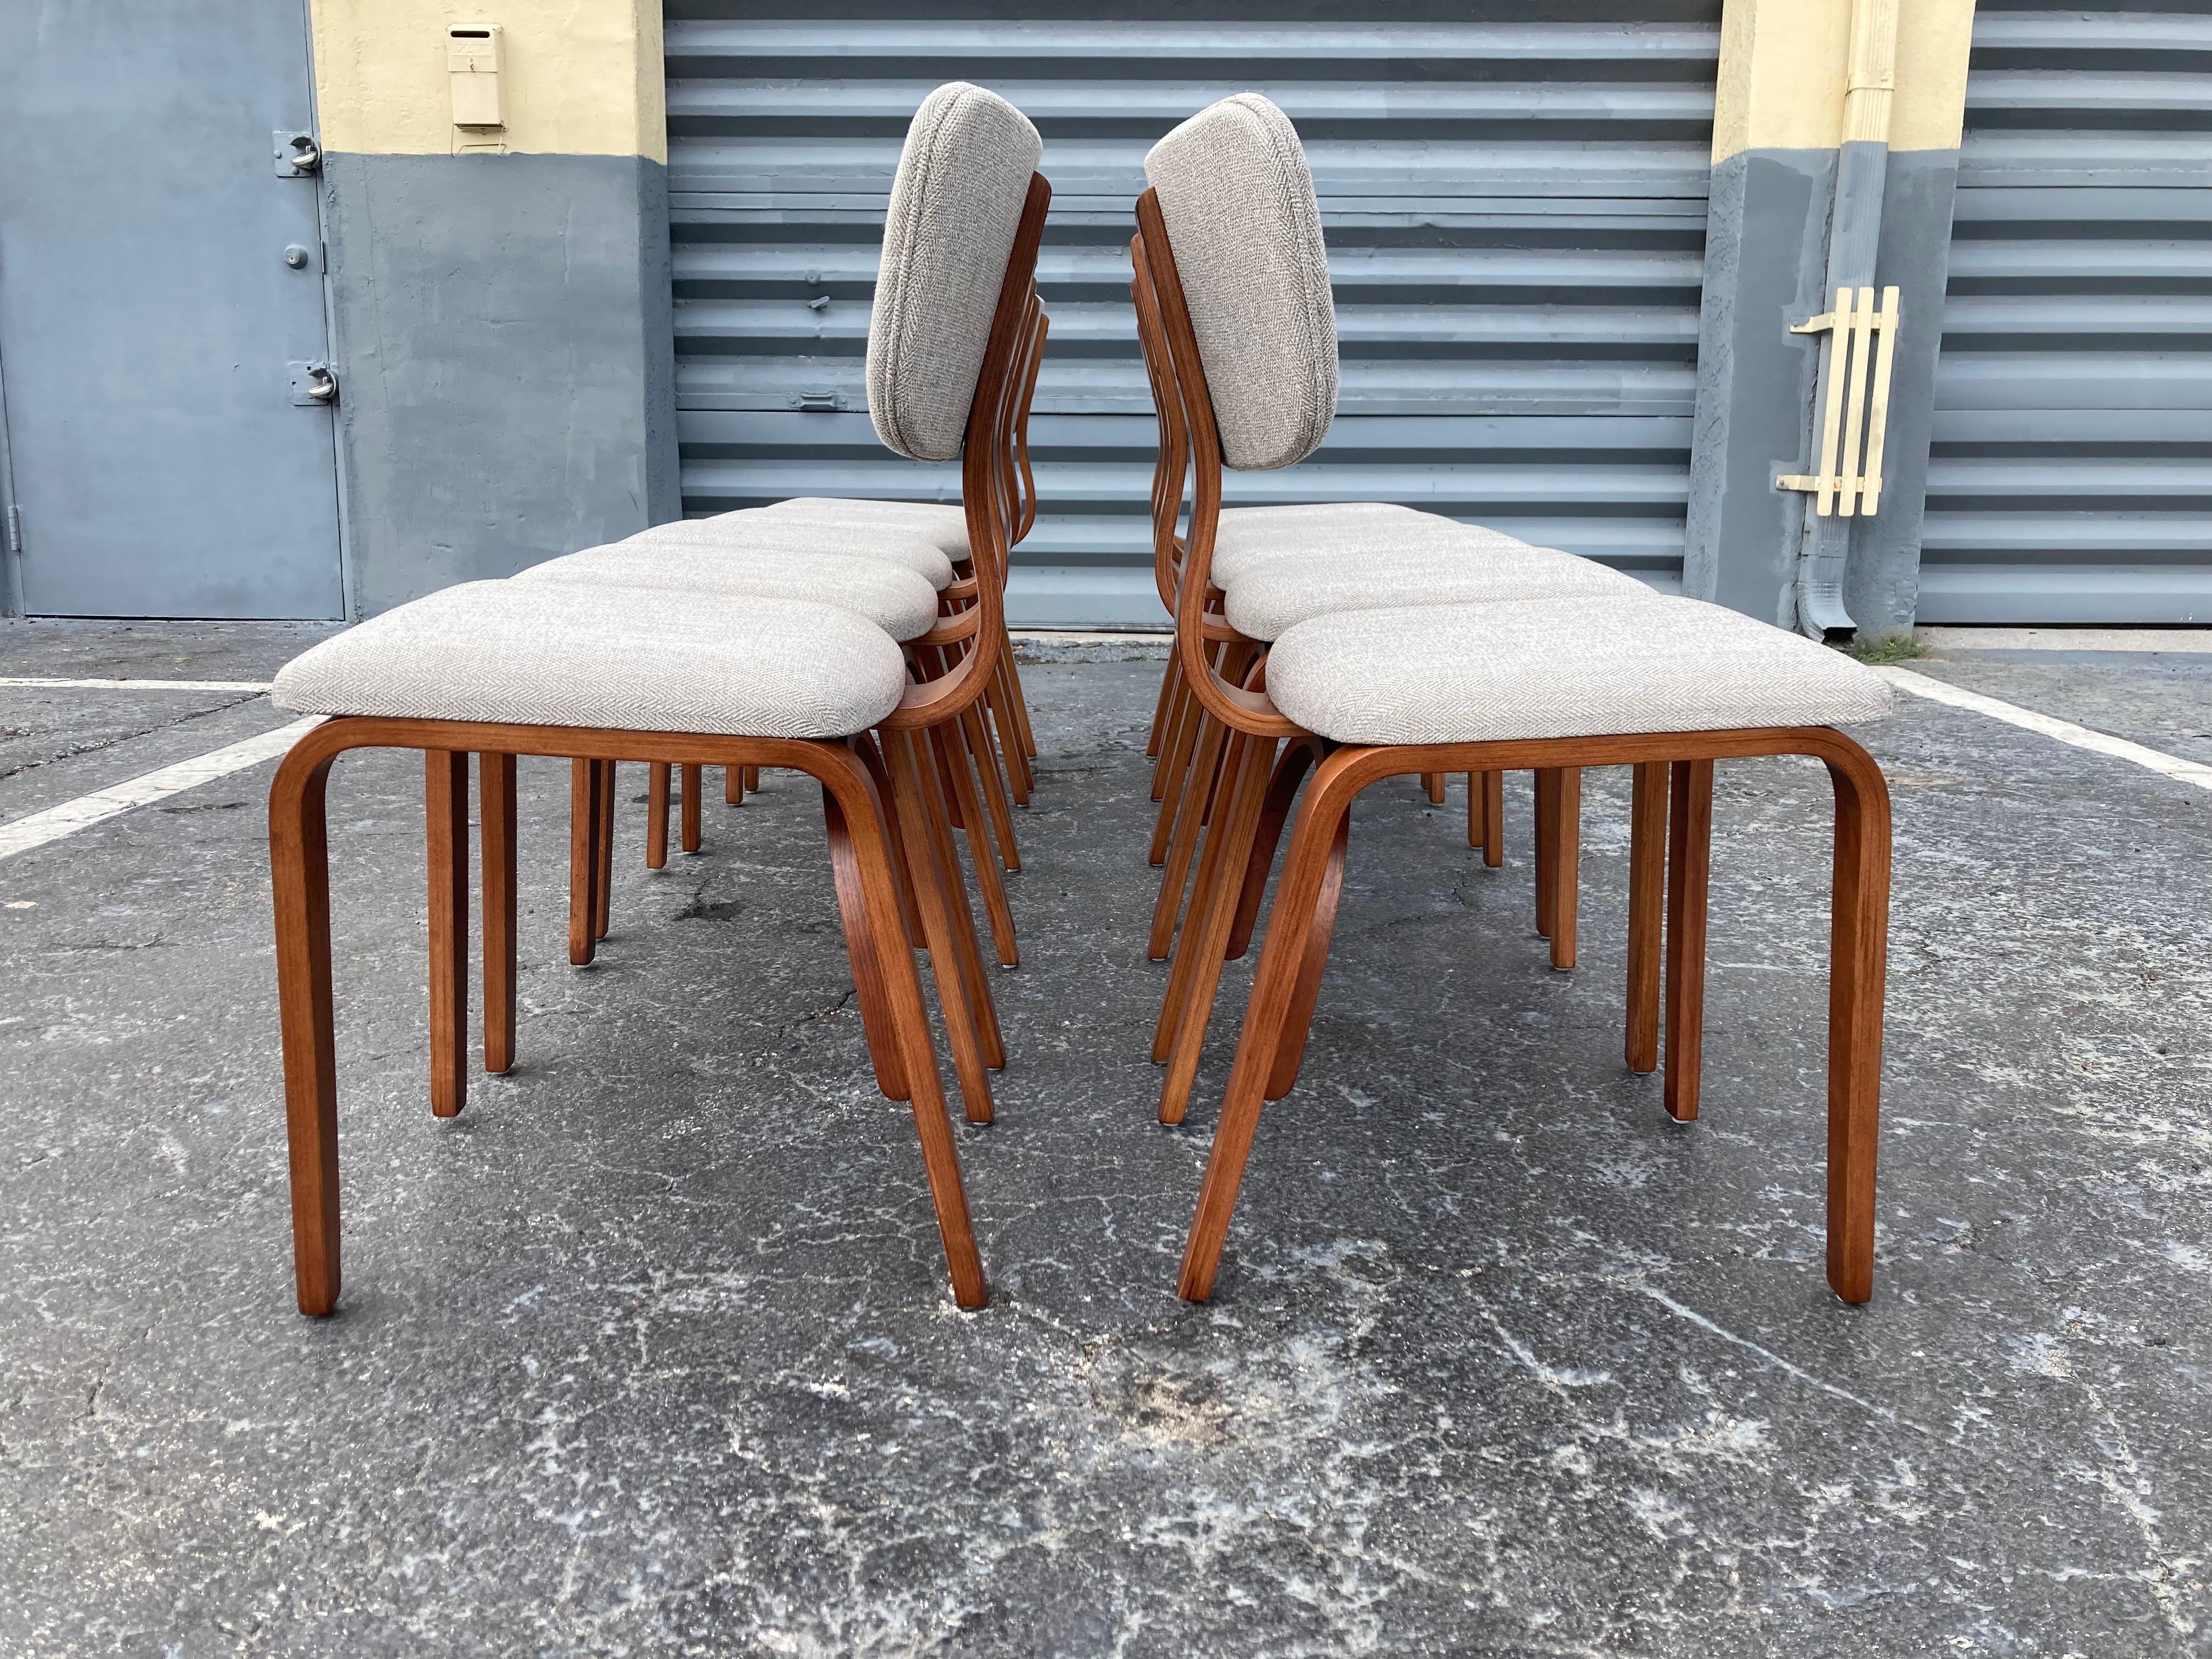 Set of ten chairs designed in 1950's by Joe Atkinson for Thonet, USA, Birch plywood with a walnut finish. Fabric is new. Ready for a new home.